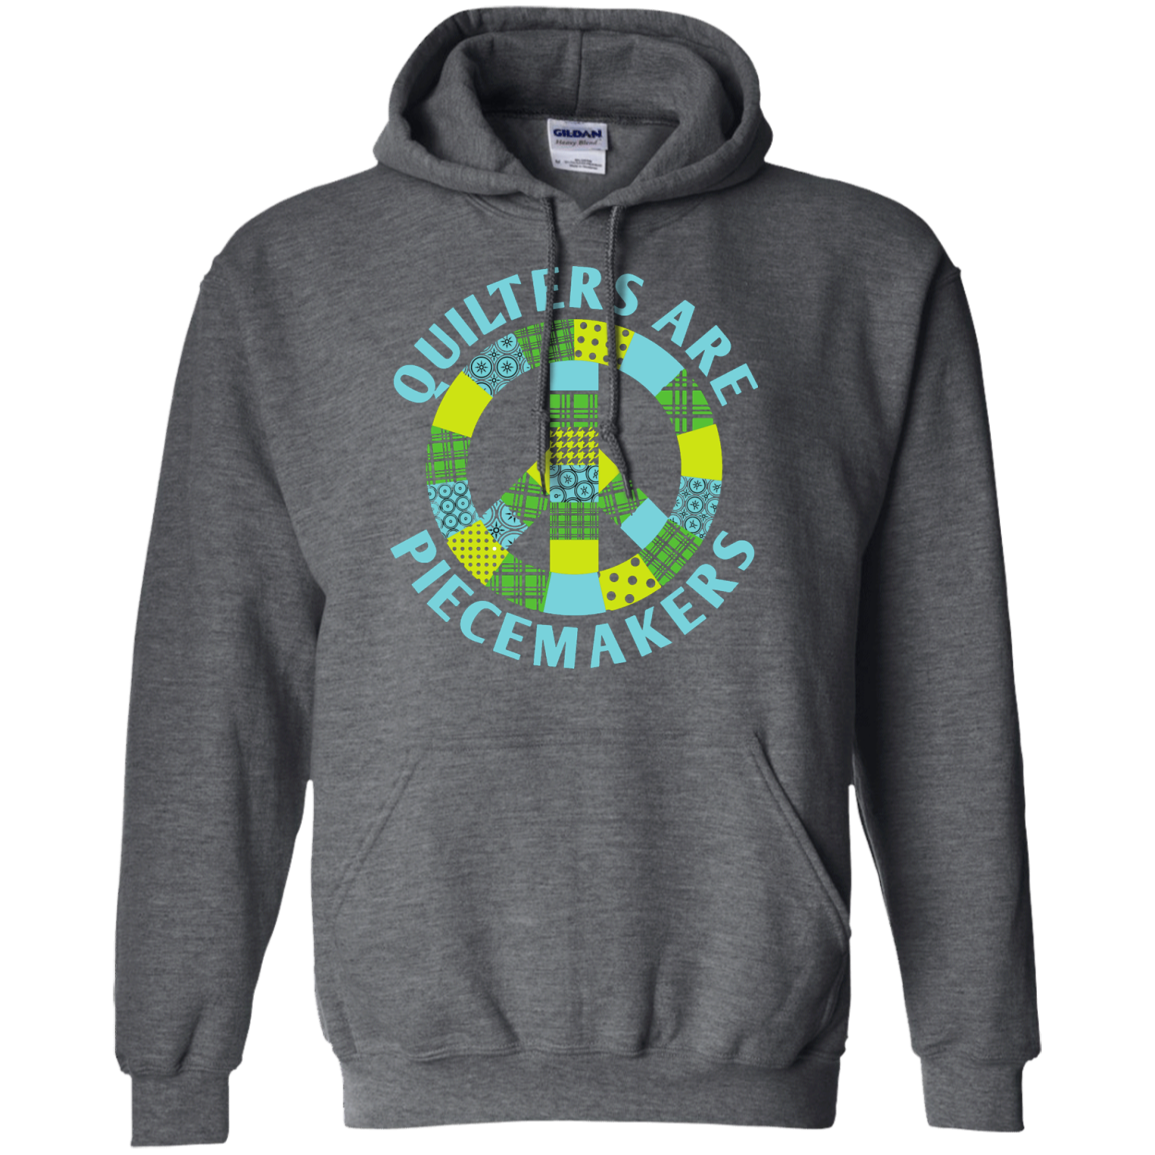 Quilters are Piecemakers Pullover Hoodies - Crafter4Life - 3